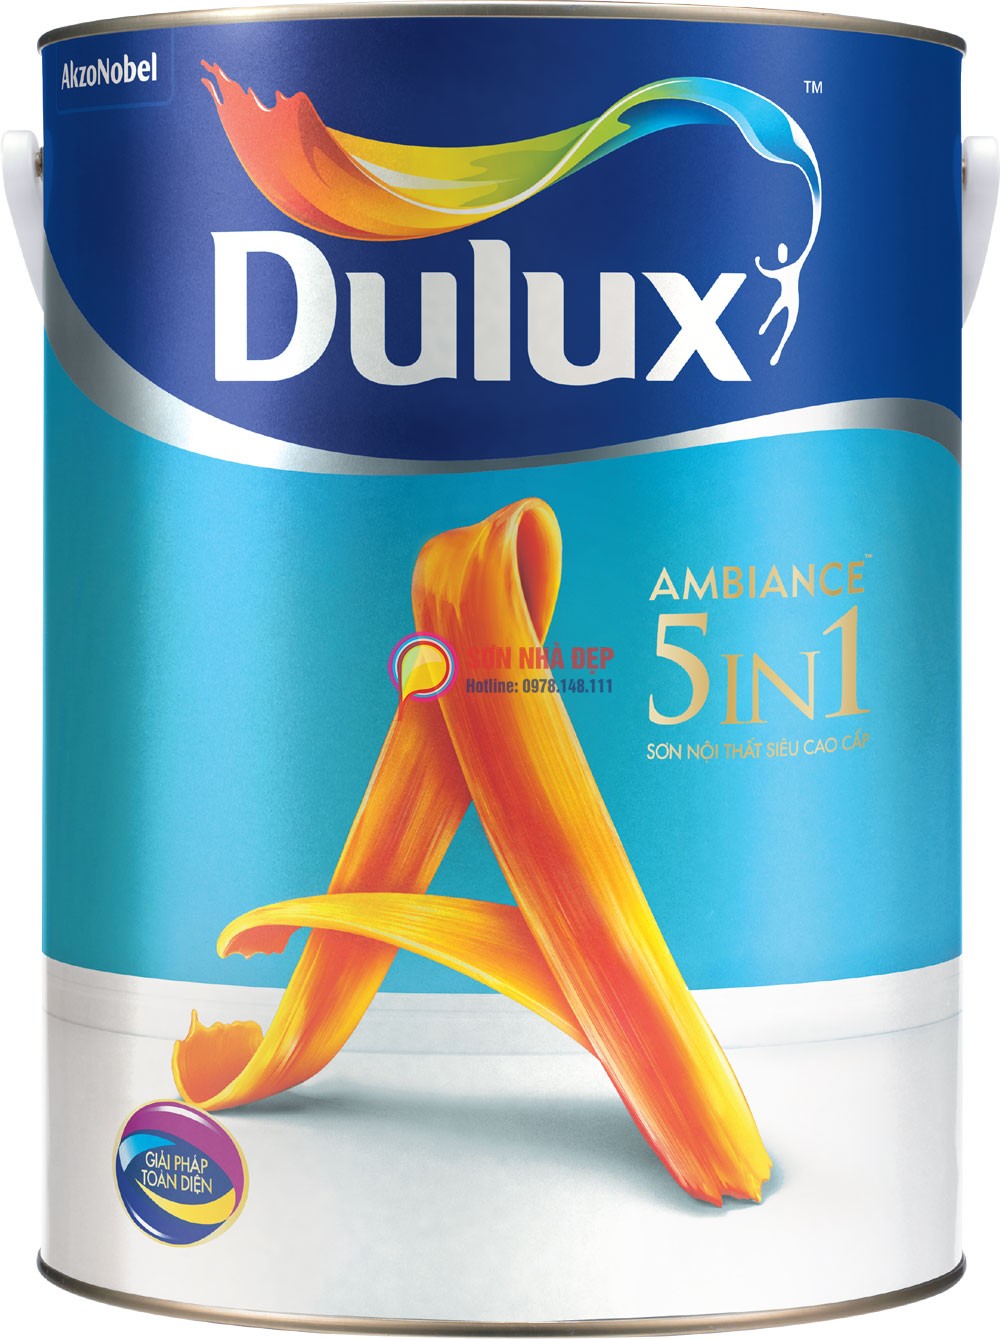 Dulux-Ambiance 5in1